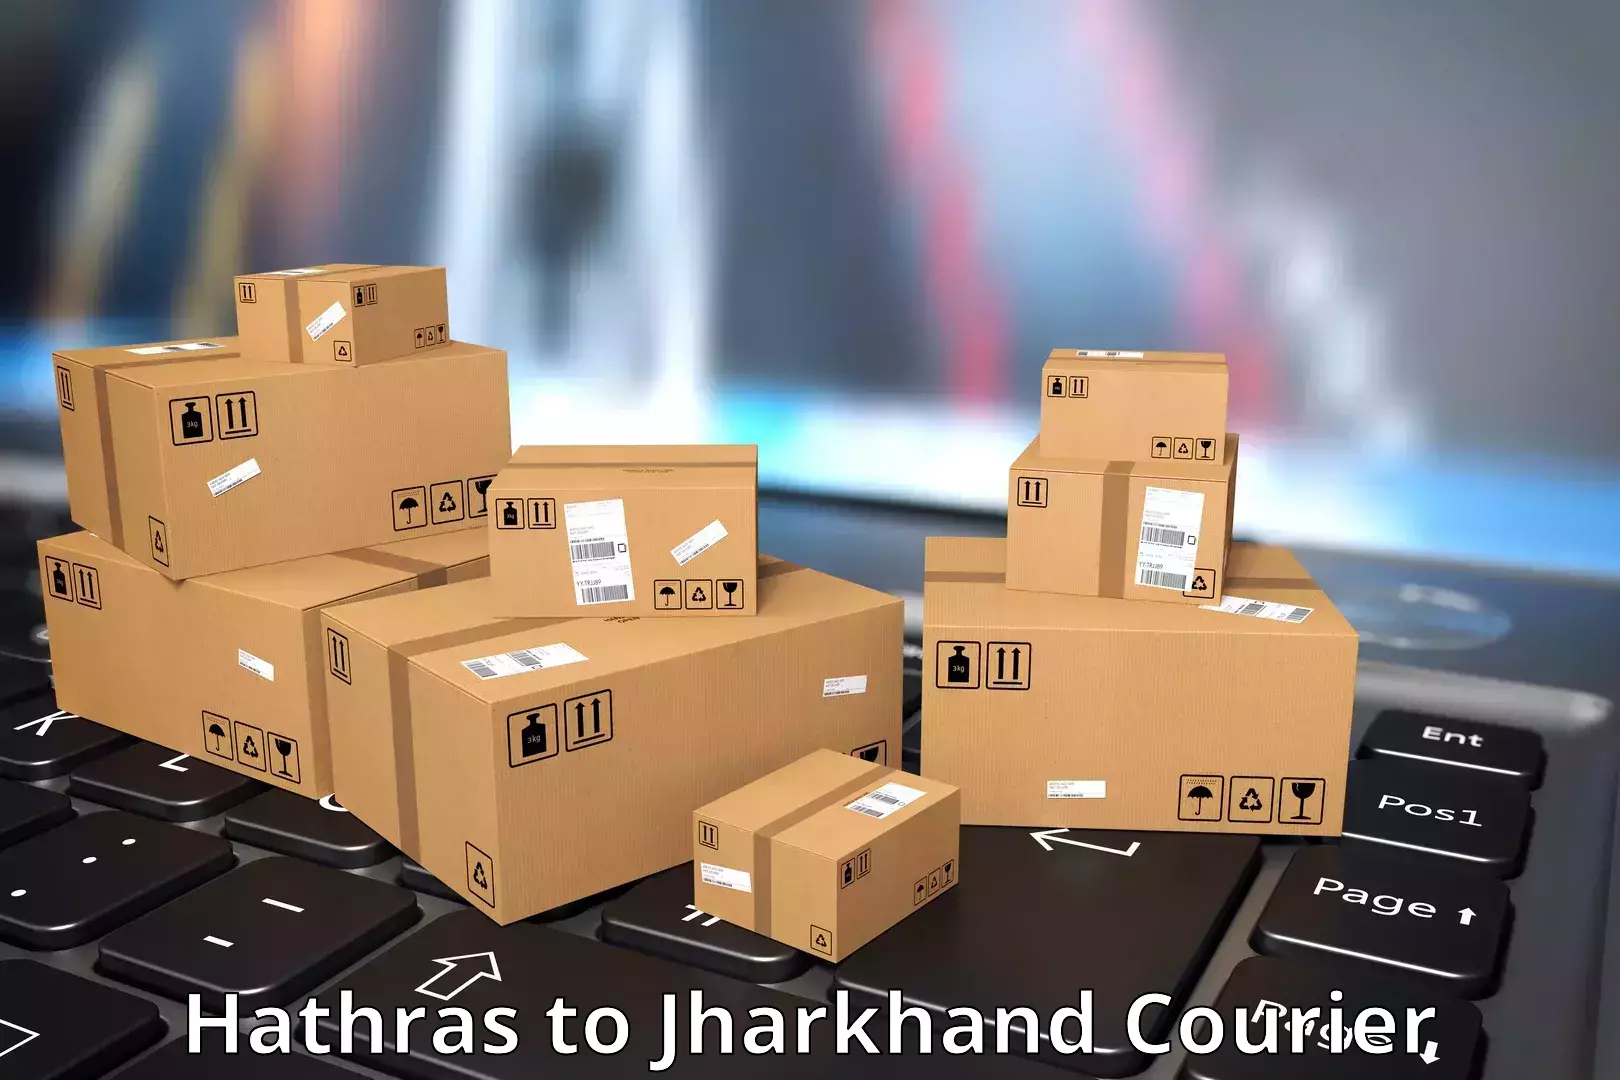 Reliable courier service in Hathras to Kedla